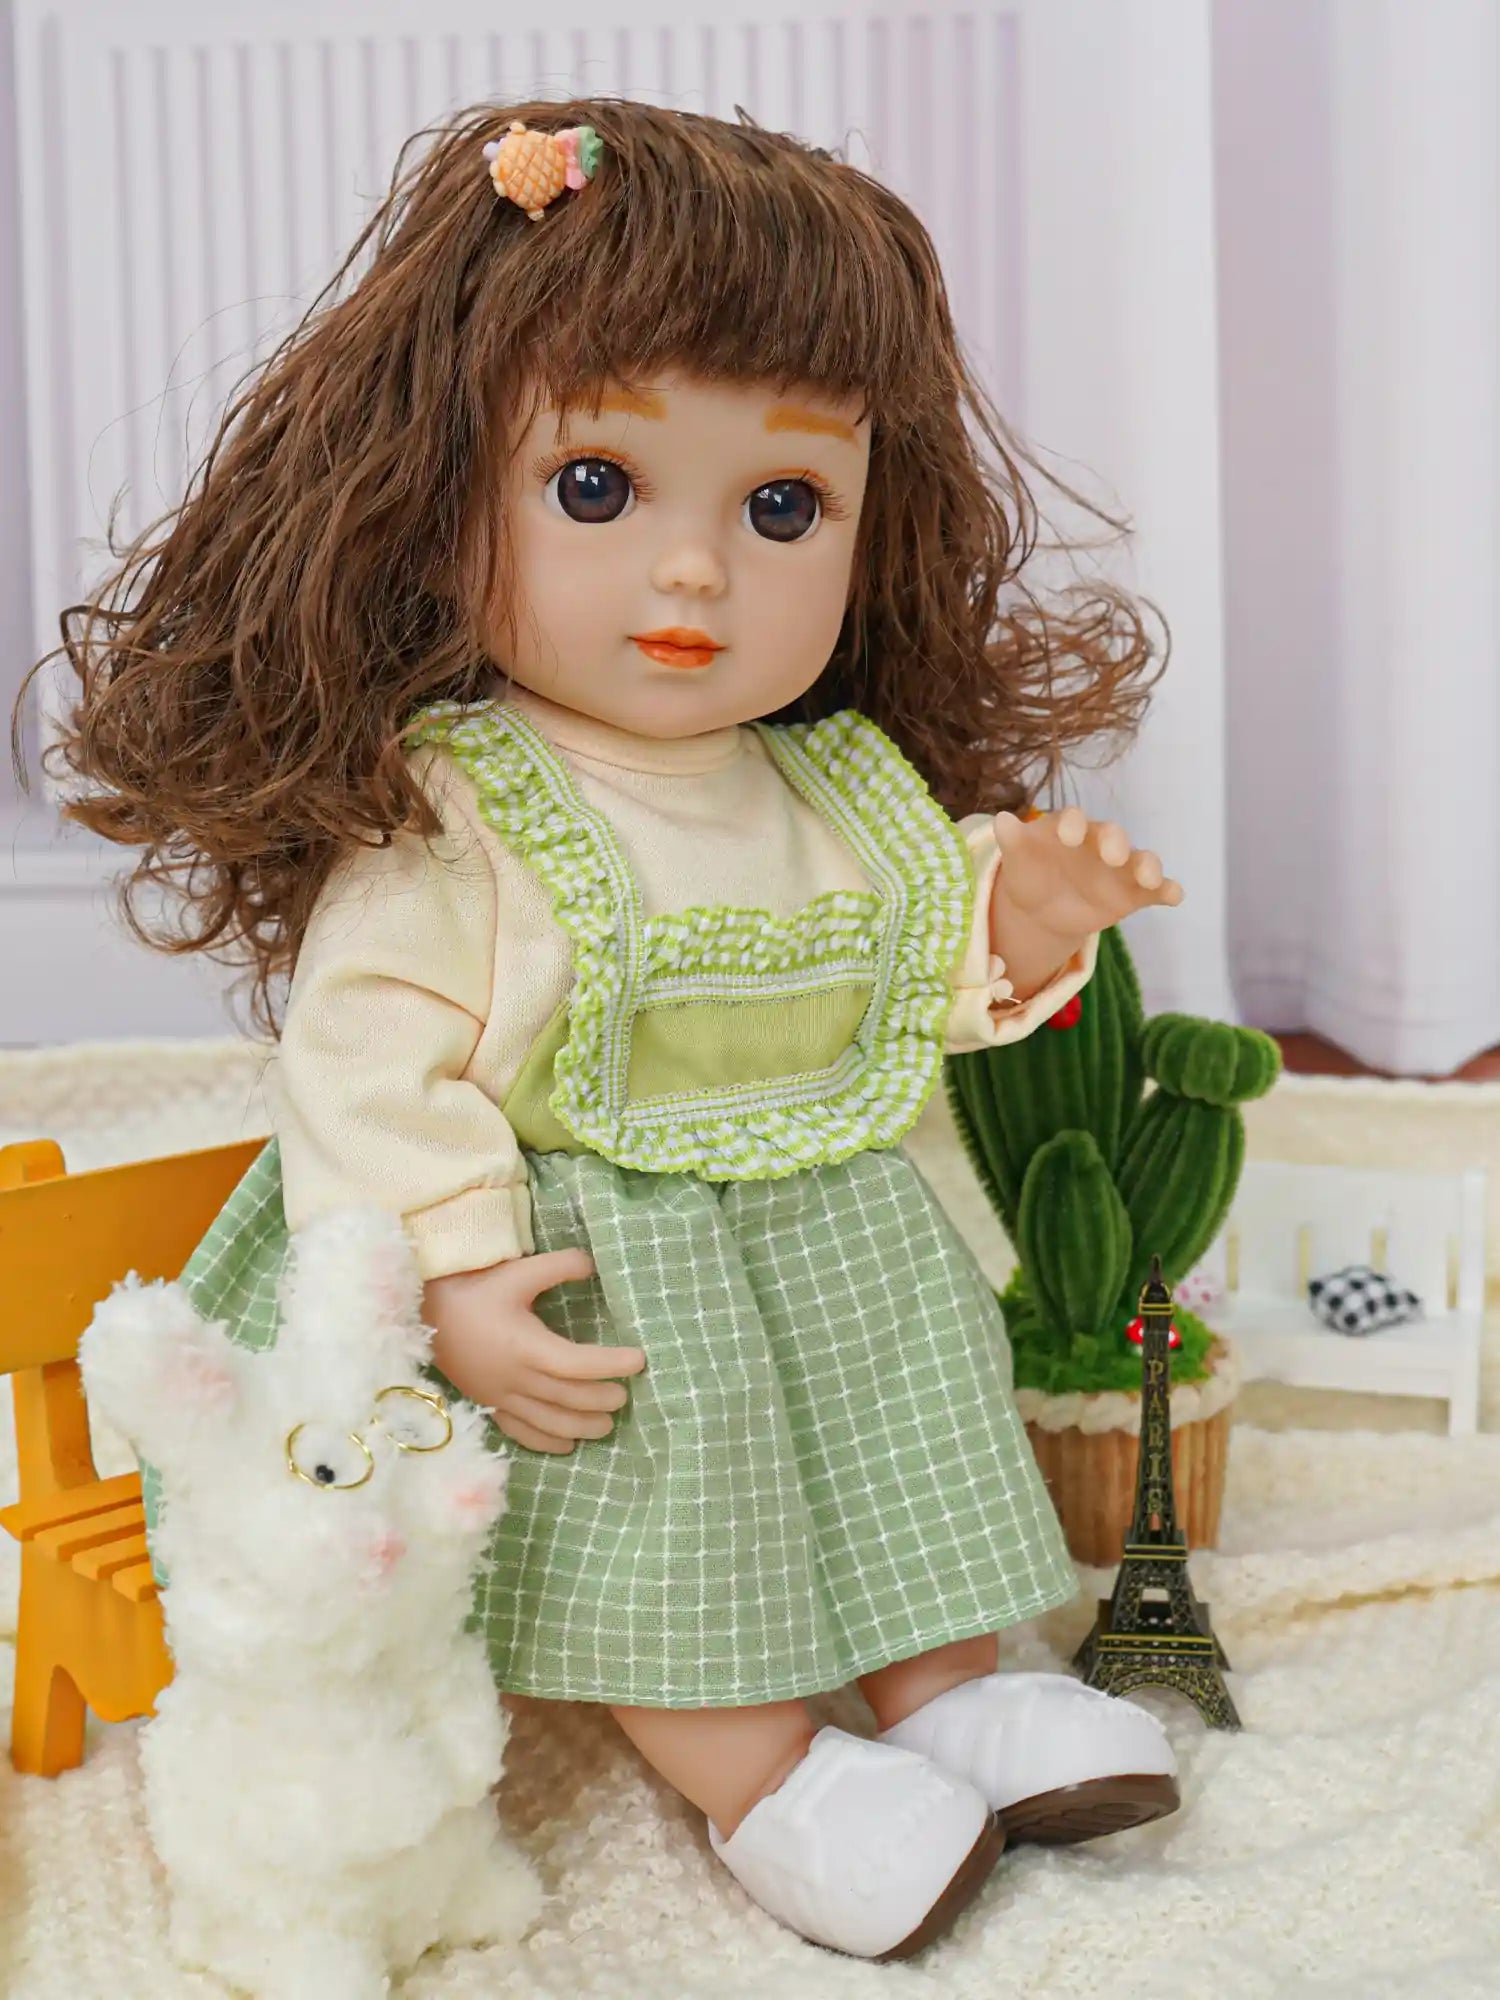 Realistic doll with layered clothing, next to quirky plush dogs and a decorative cactus.